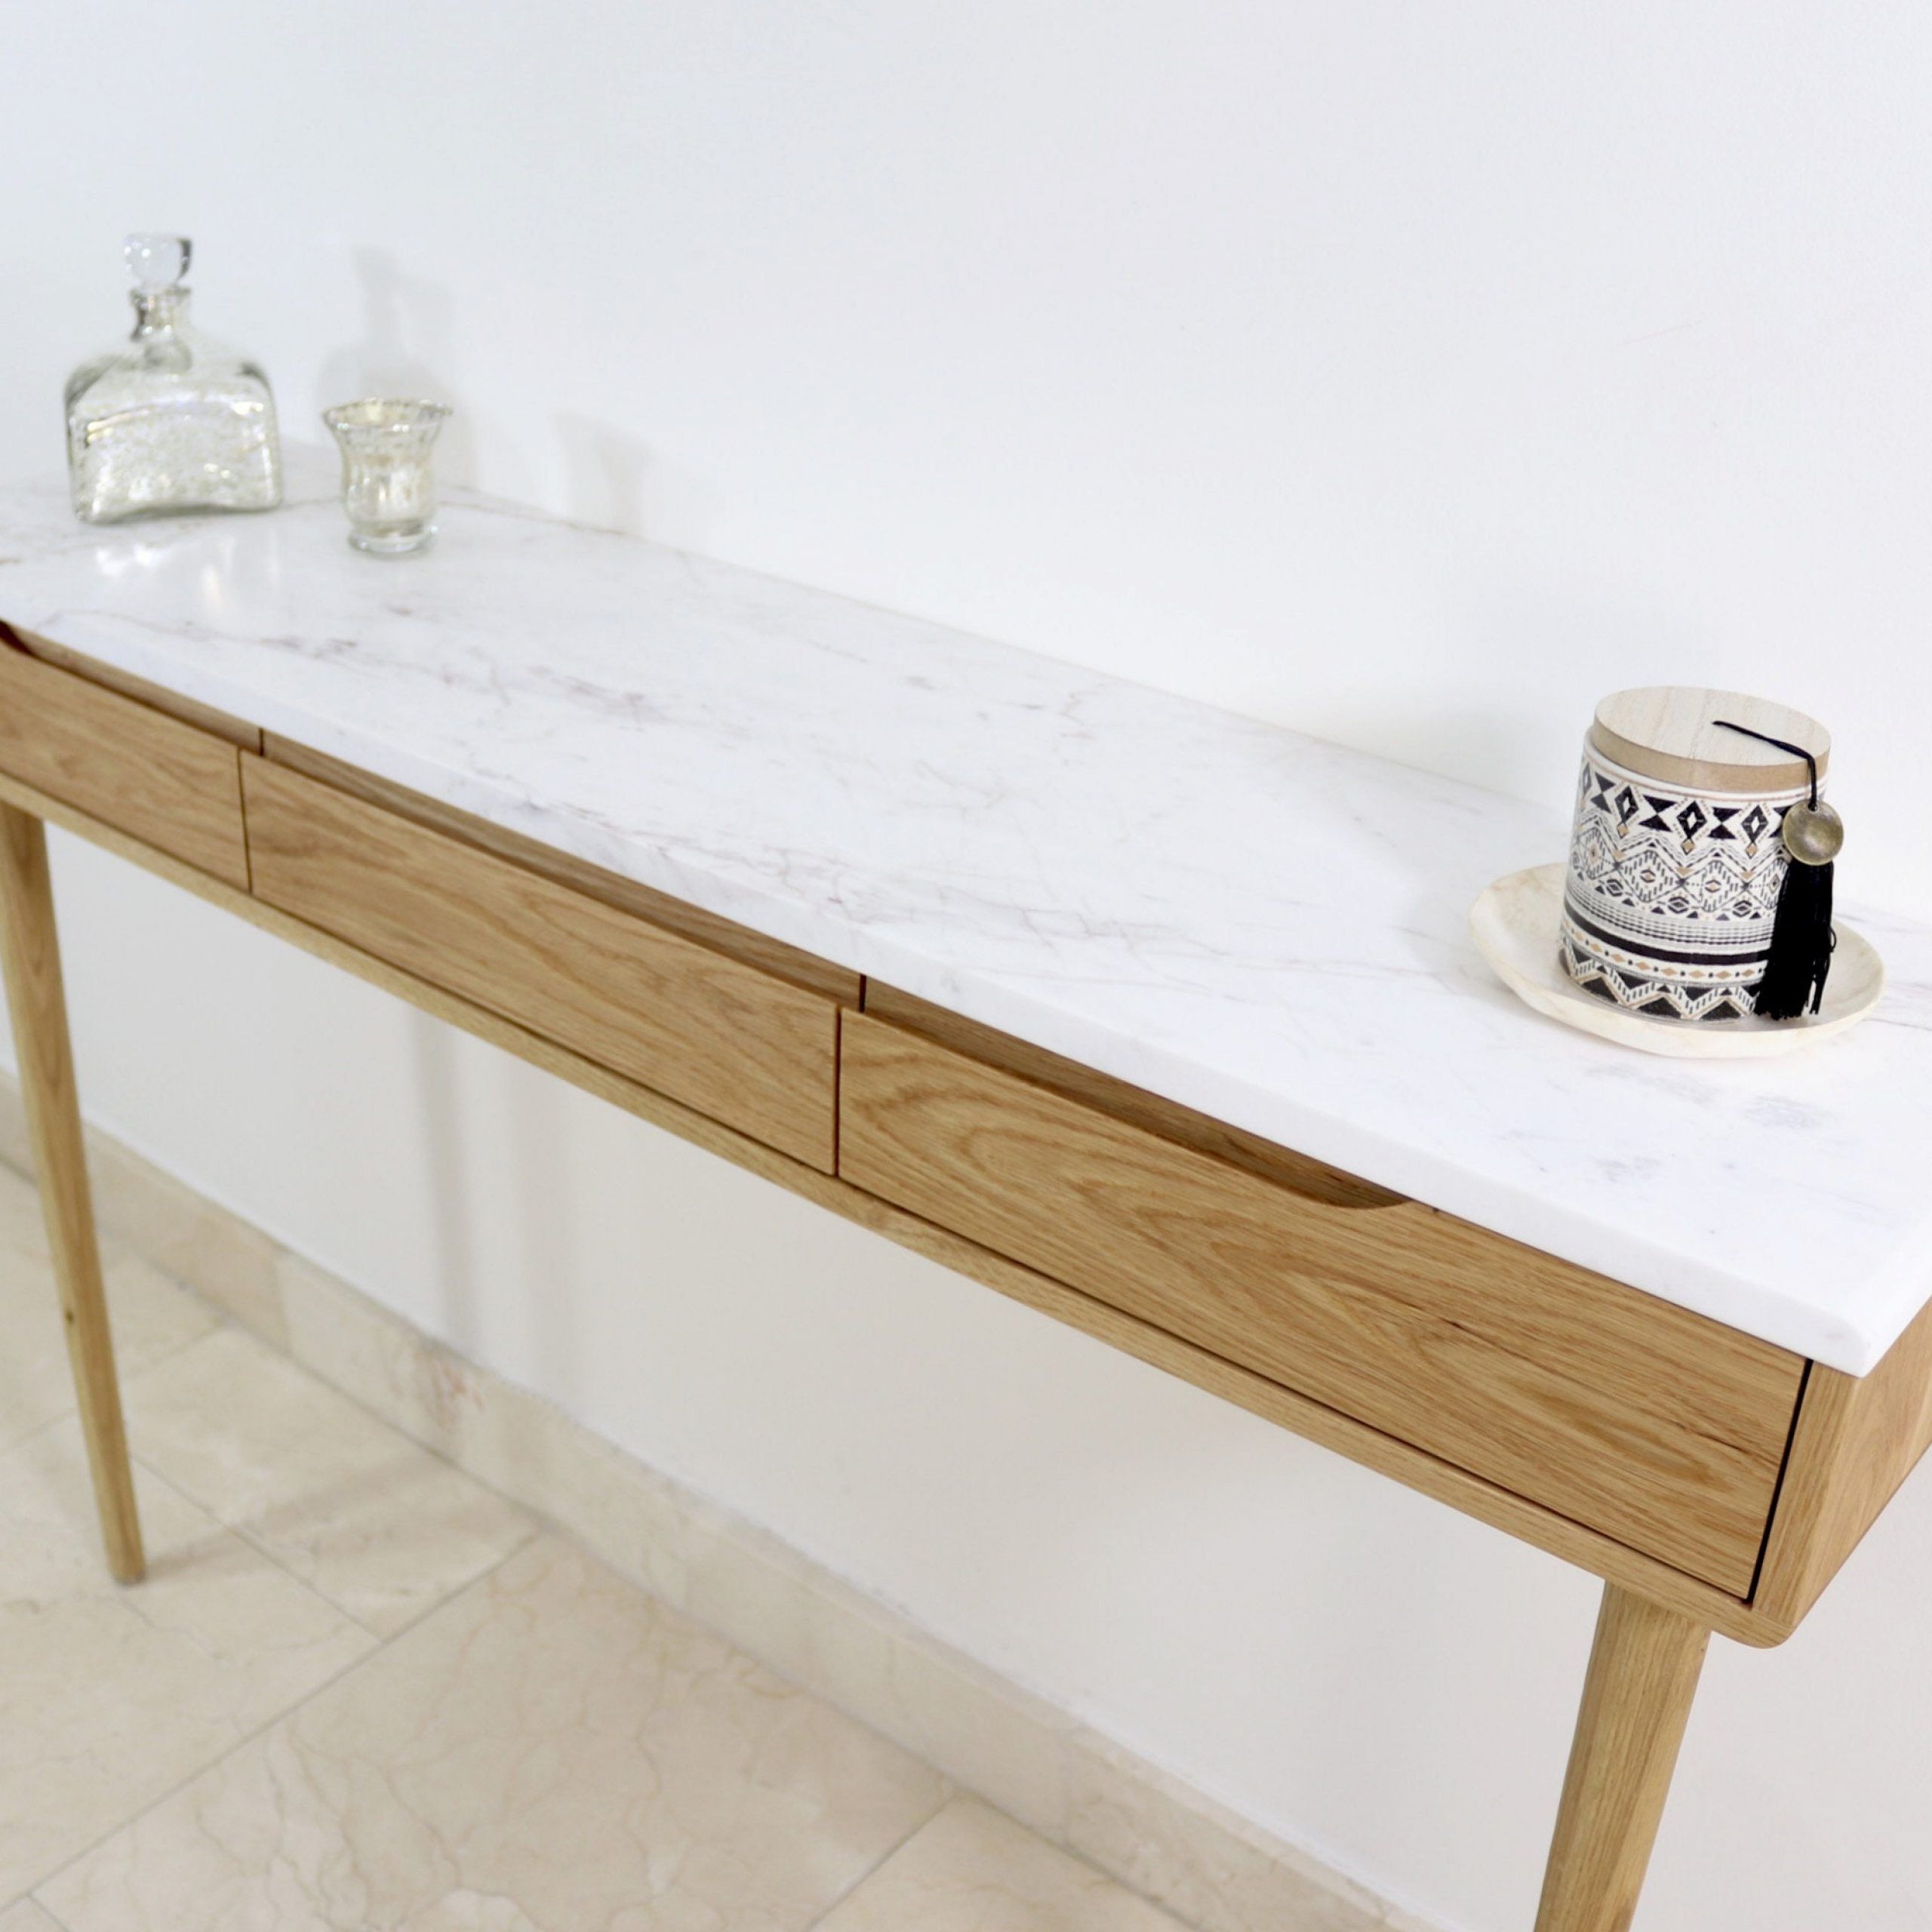 Console Table With Drawers In Solid American Oak With Top In Wood Or Within Honey Oak And Marble Console Tables (View 8 of 20)